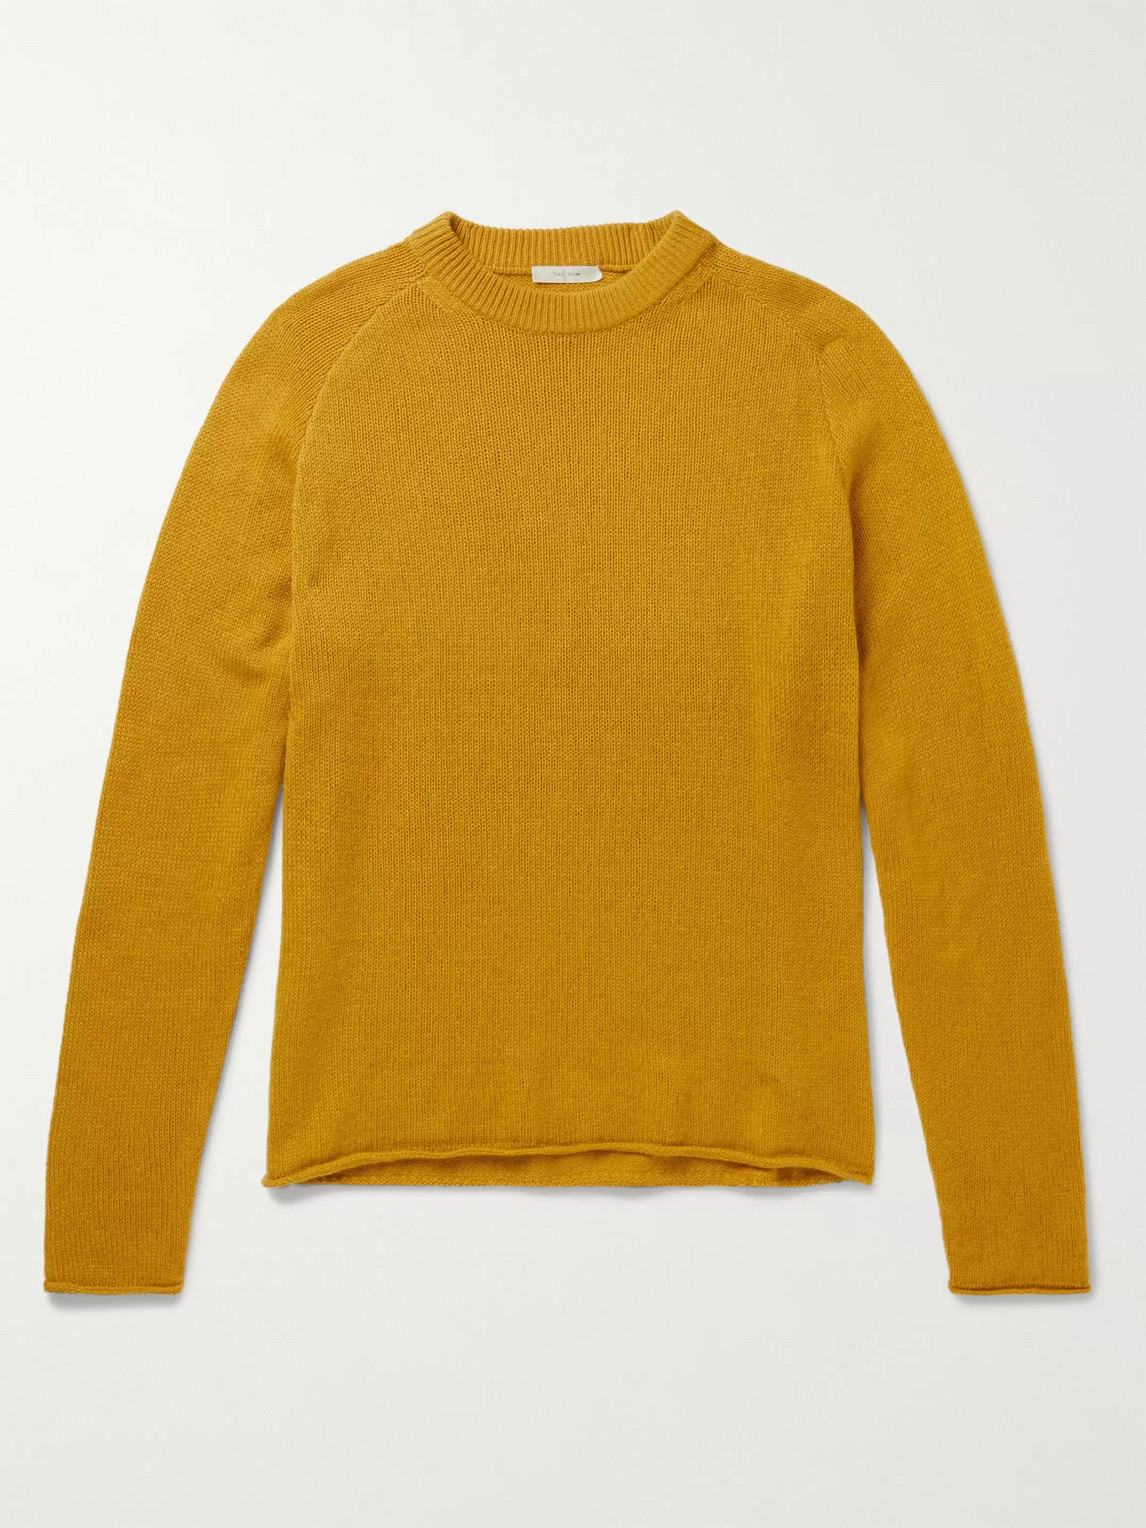 THE ROW ULMER CASHMERE SWEATER